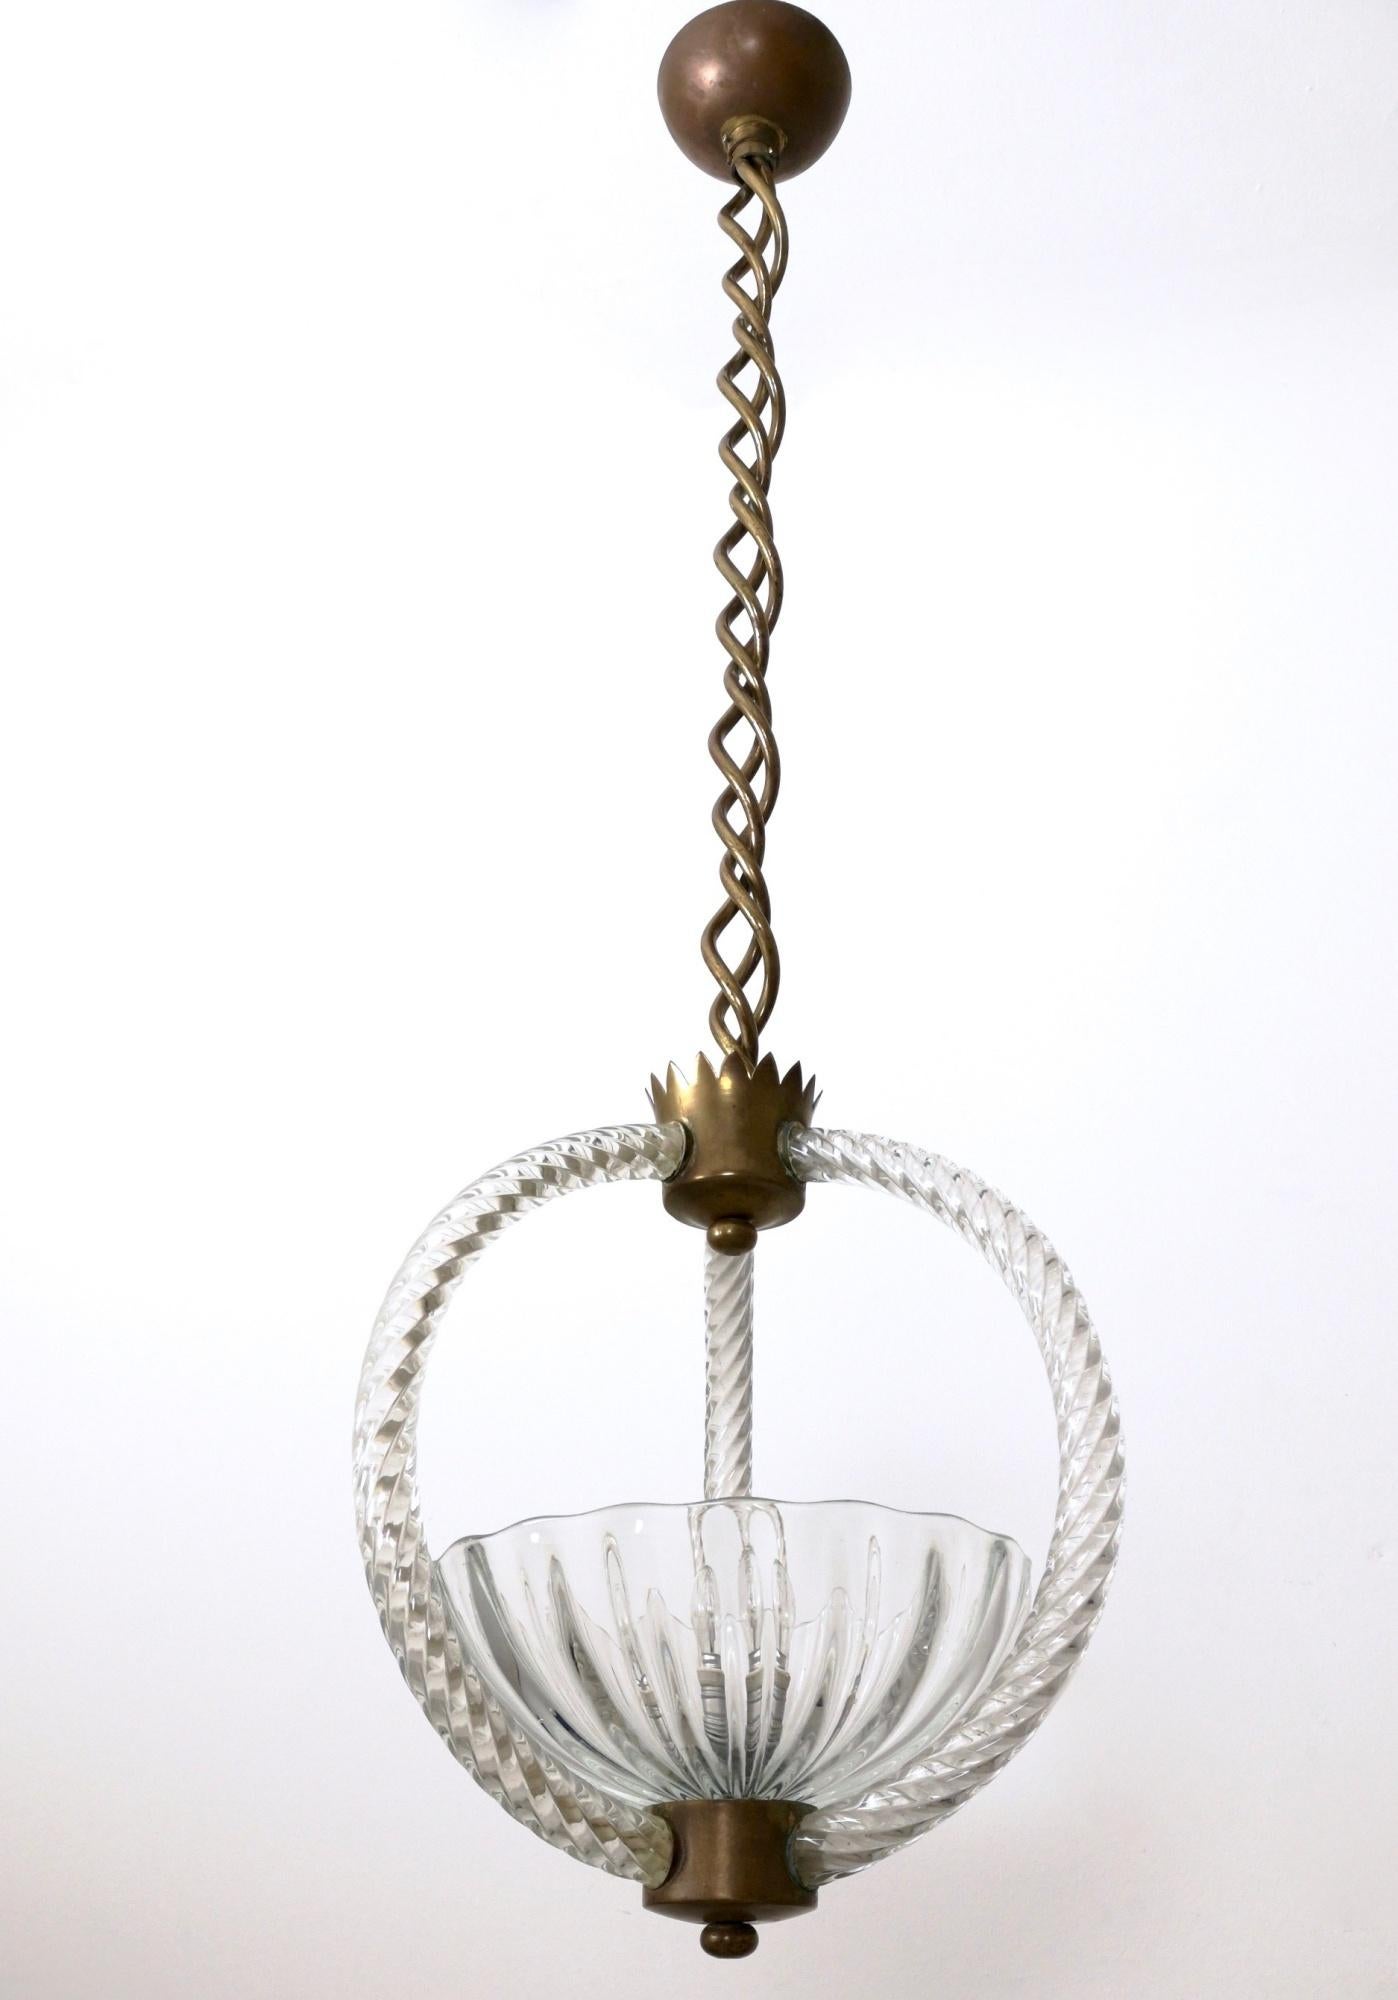 Italian Vintage Brass and Blown Glass Pendant by Ercole Barovier, Italy, 1940s